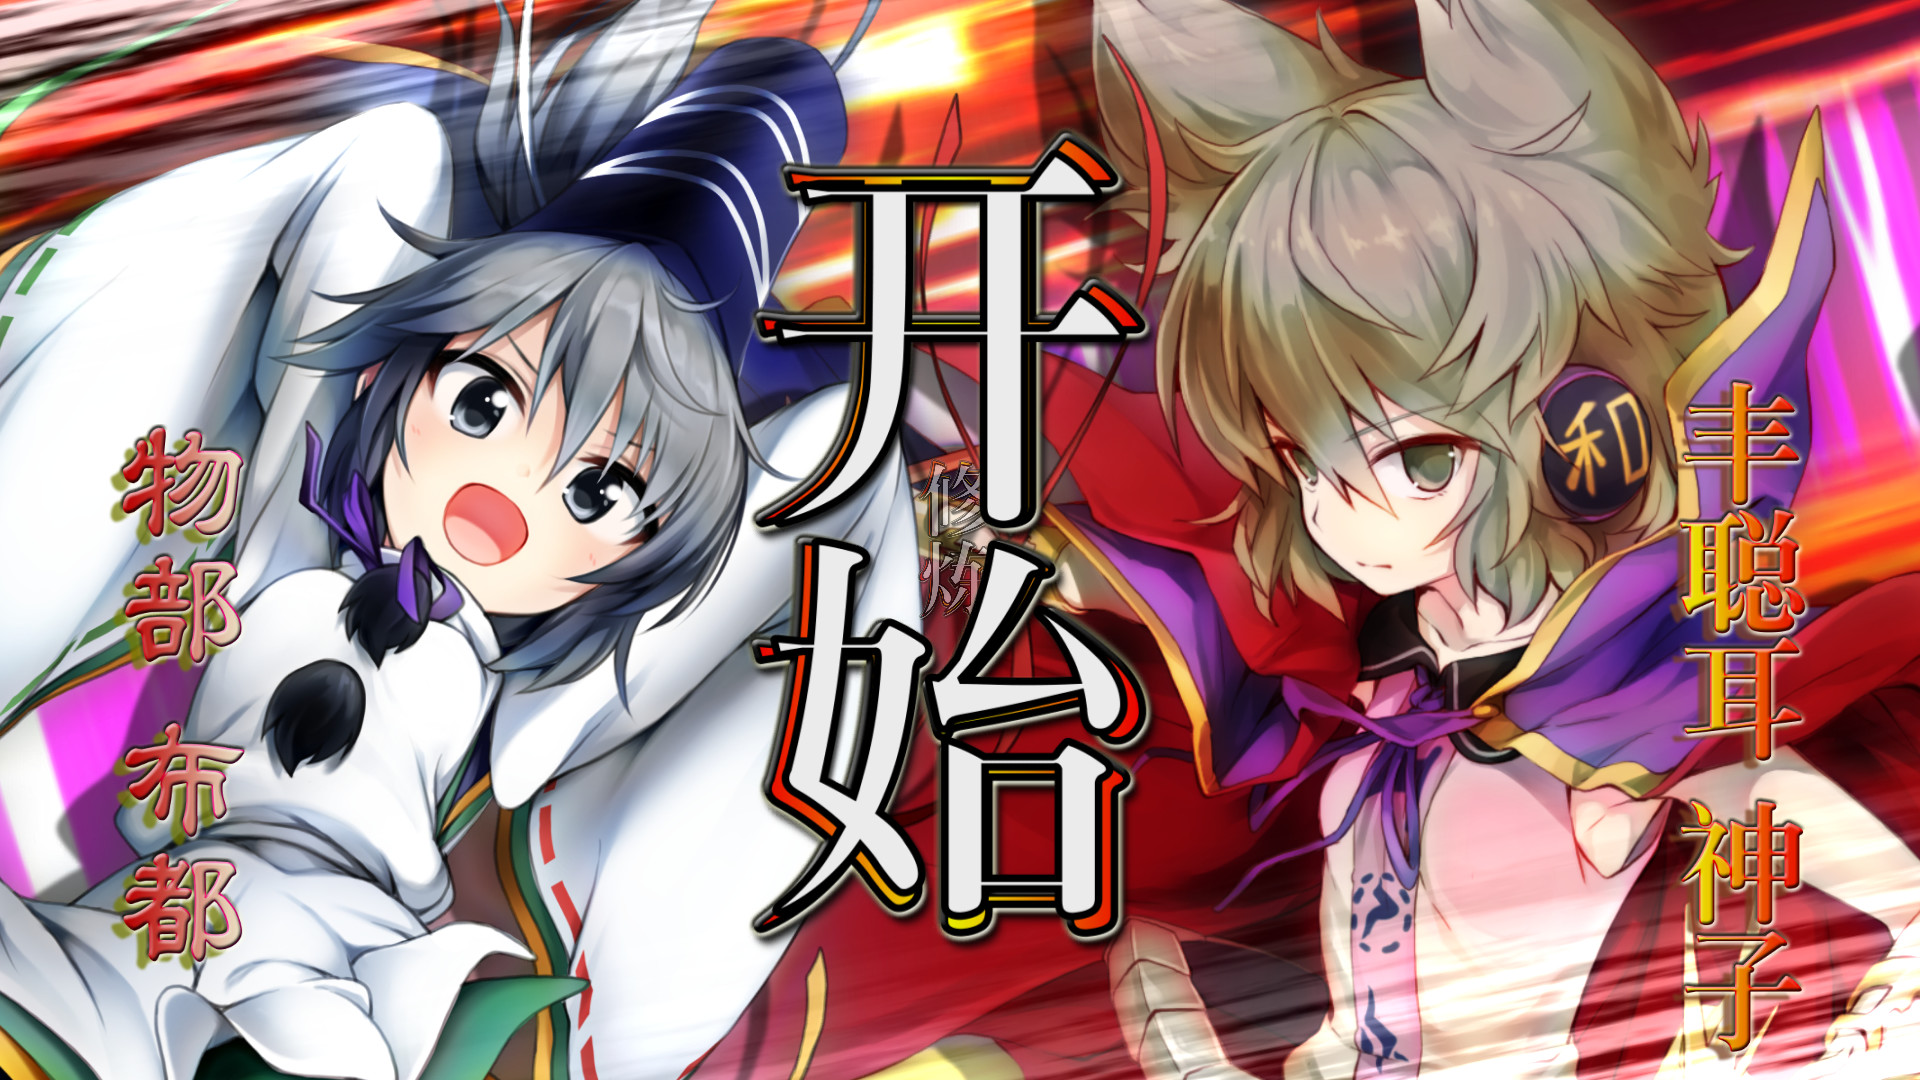 Touhou Genso Wanderer Reloaded 不可思议的幻想乡tod Reloaded 不思議の幻想郷tod Reloaded